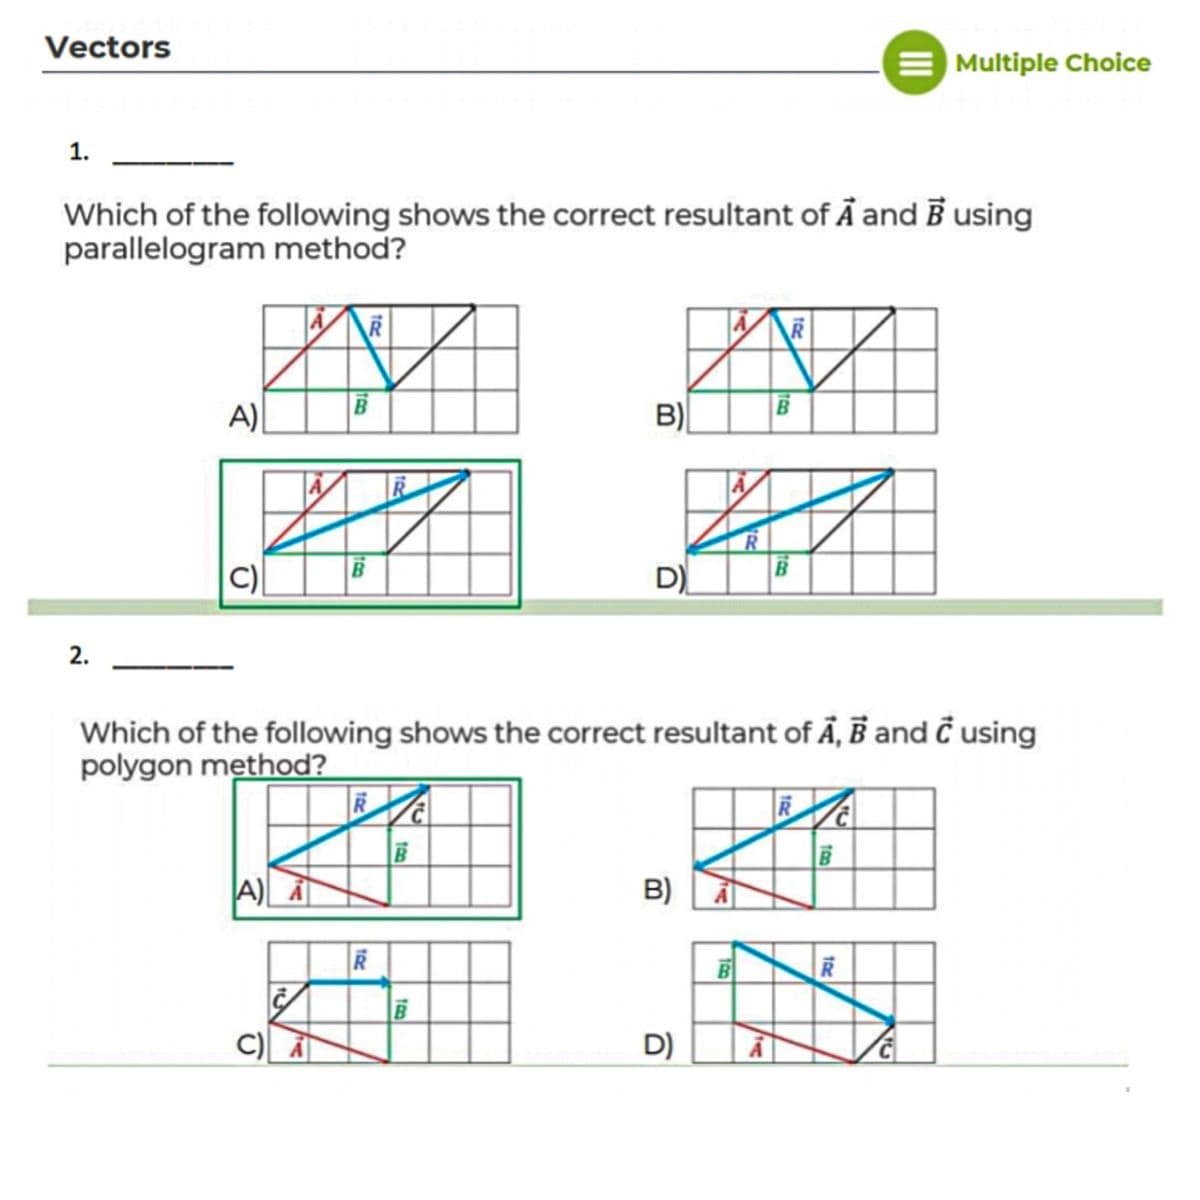 Vectors
Multiple Choice
1.
Which of the following shows the correct resultant of Ả and B using
parallelogram method?
B
A)
B)
D)
2.
Which of the following shows the correct resultant of Ã, B and Ĉ using
polygon method?
A)
B)
司
C) A
D)
